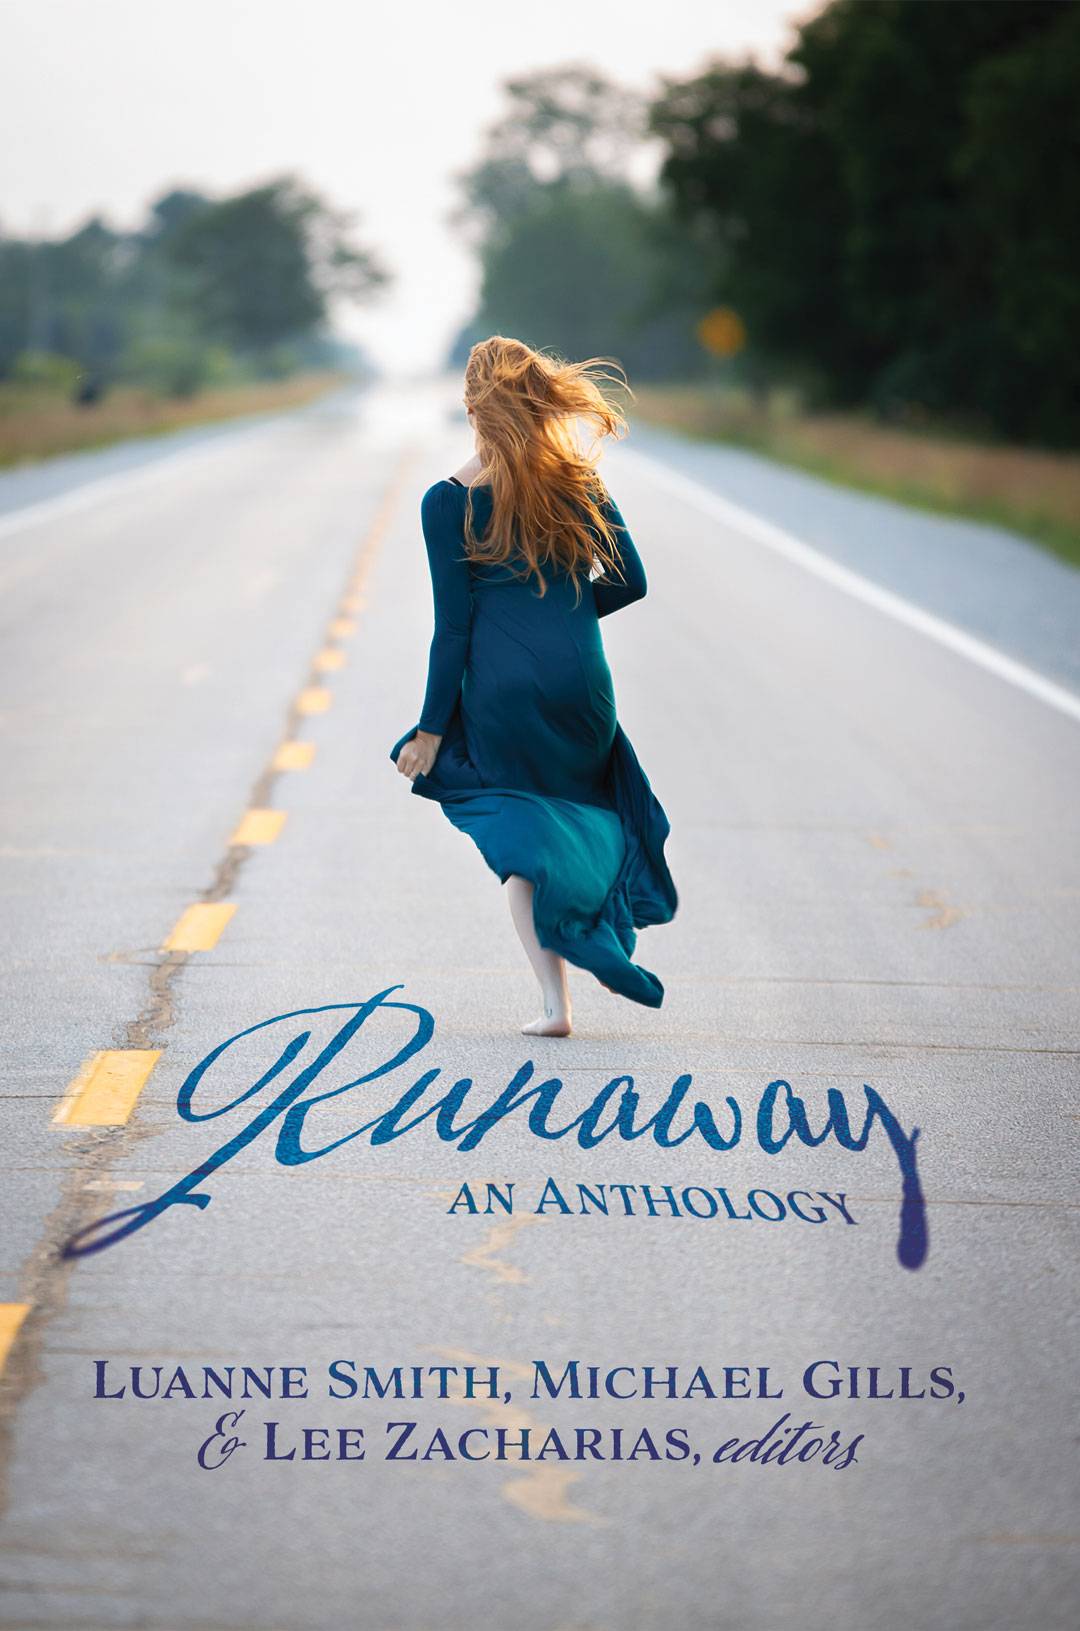 Runaway: An Anthology, edited by Luanne Smith, Michael Gills, and Lee Zacharias. cover shows a red-headed woman in a long teal dress running barefooted down an empty road with a dashed yellow line down the middle